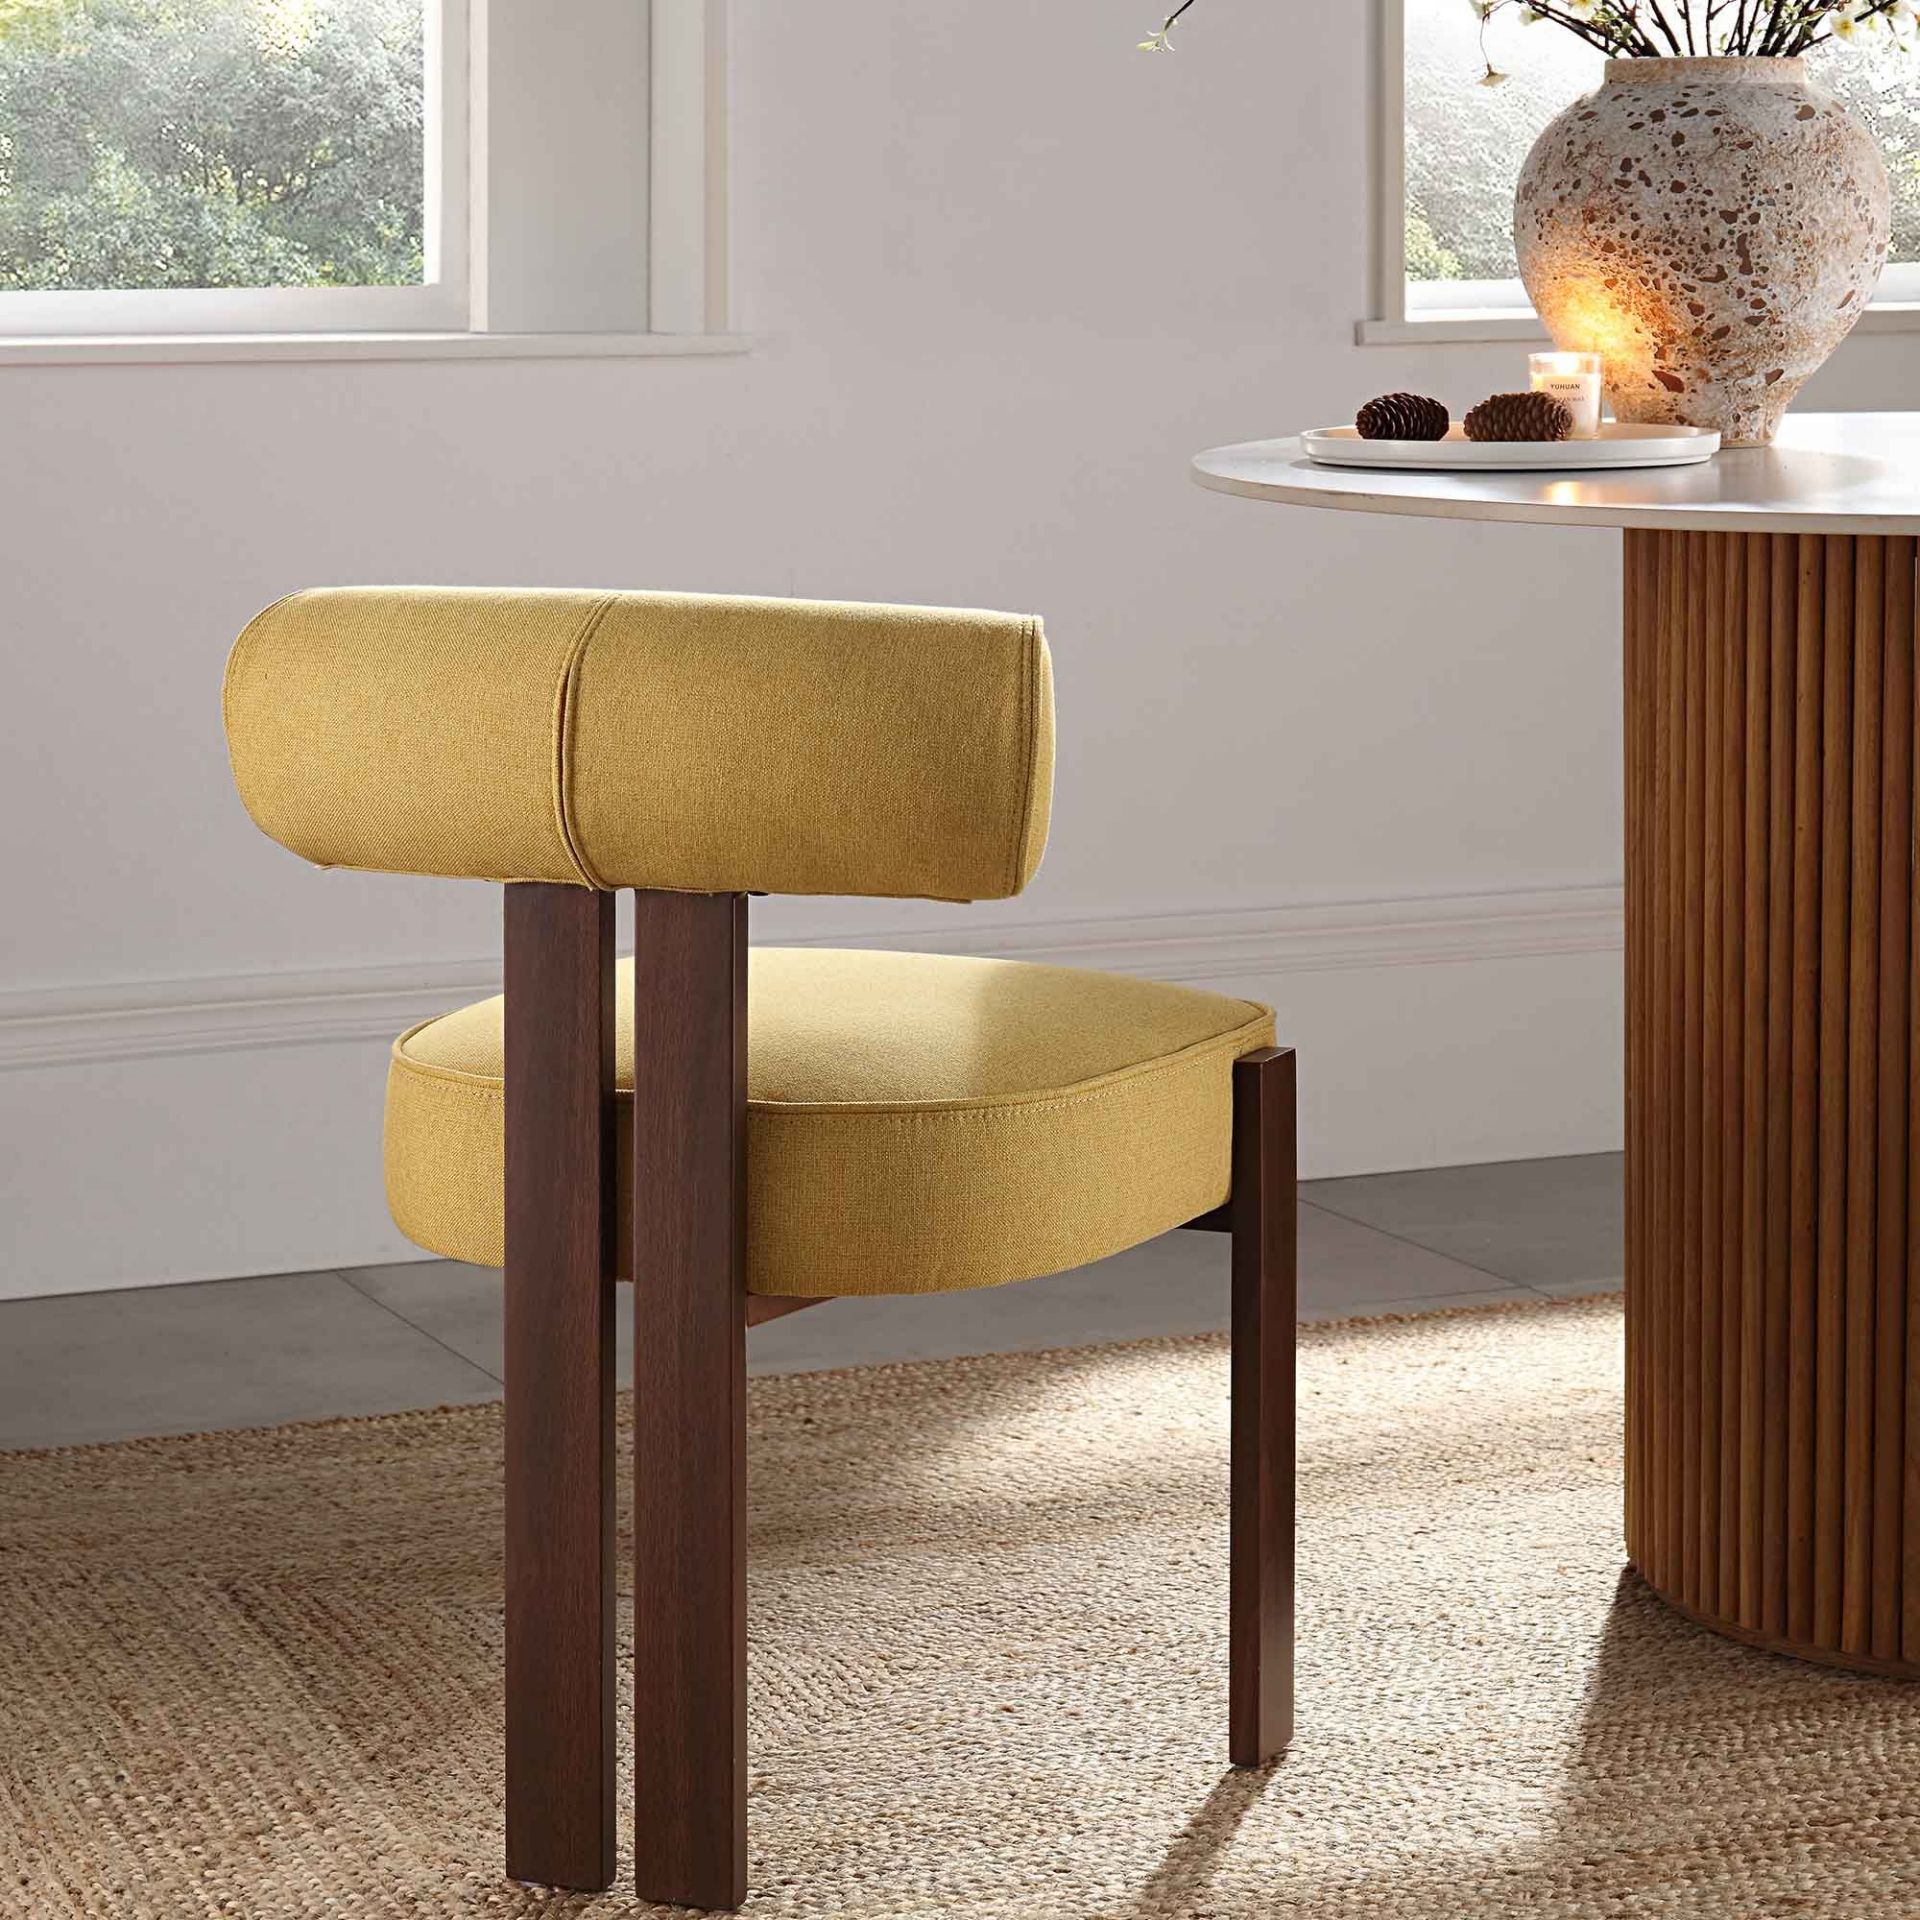 Ophelia Honey Gold Fabric Dining Chair. -R19.6. RRP £209.99. Upholstered with beautiful yellow - Image 2 of 2